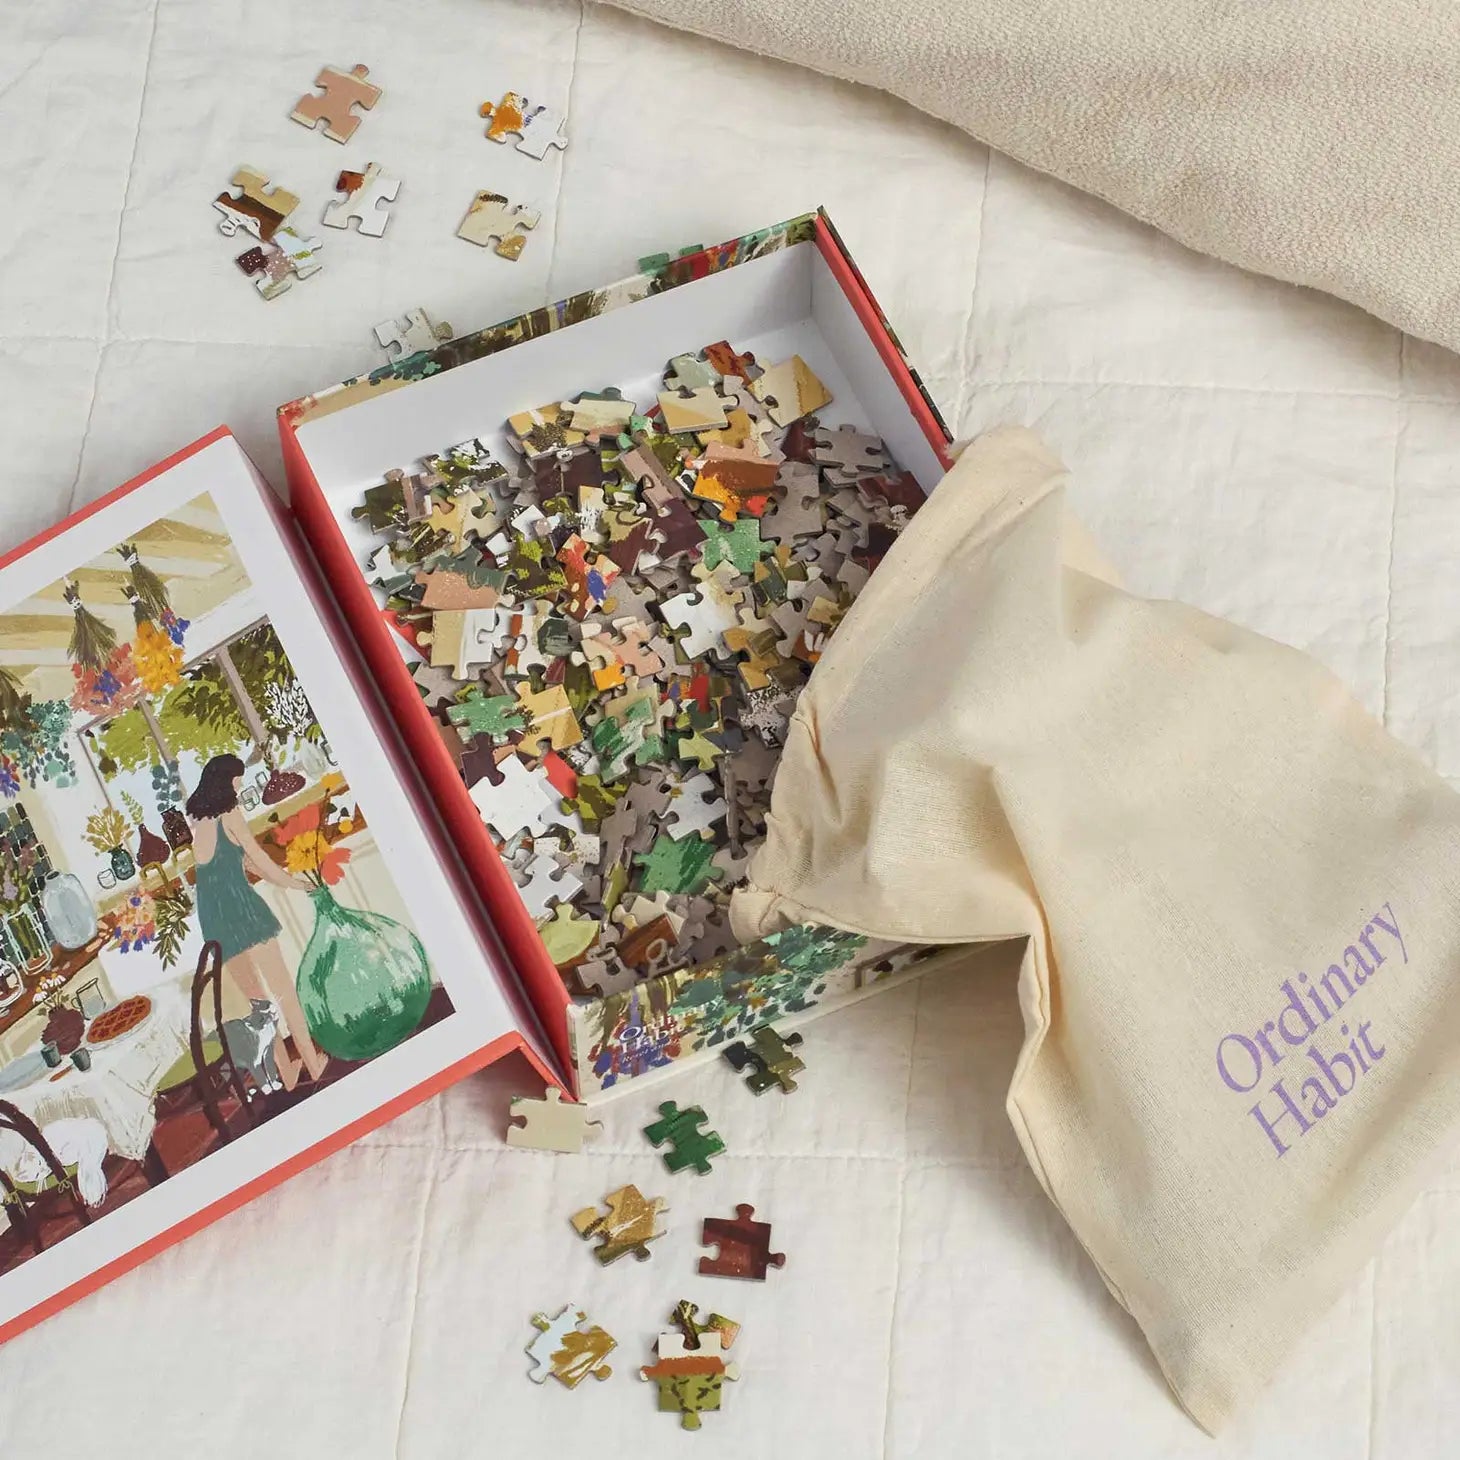 Open box display of Ordinary Habit's "Home Flowering" 500 piece puzzle. Shows inside the puzzle box with the puzzle picture on the left side depicting a girl arranging dried flowers in her kitchen. There is a drawstring bag to contain the pieces which are spilling out of the bag into the box.